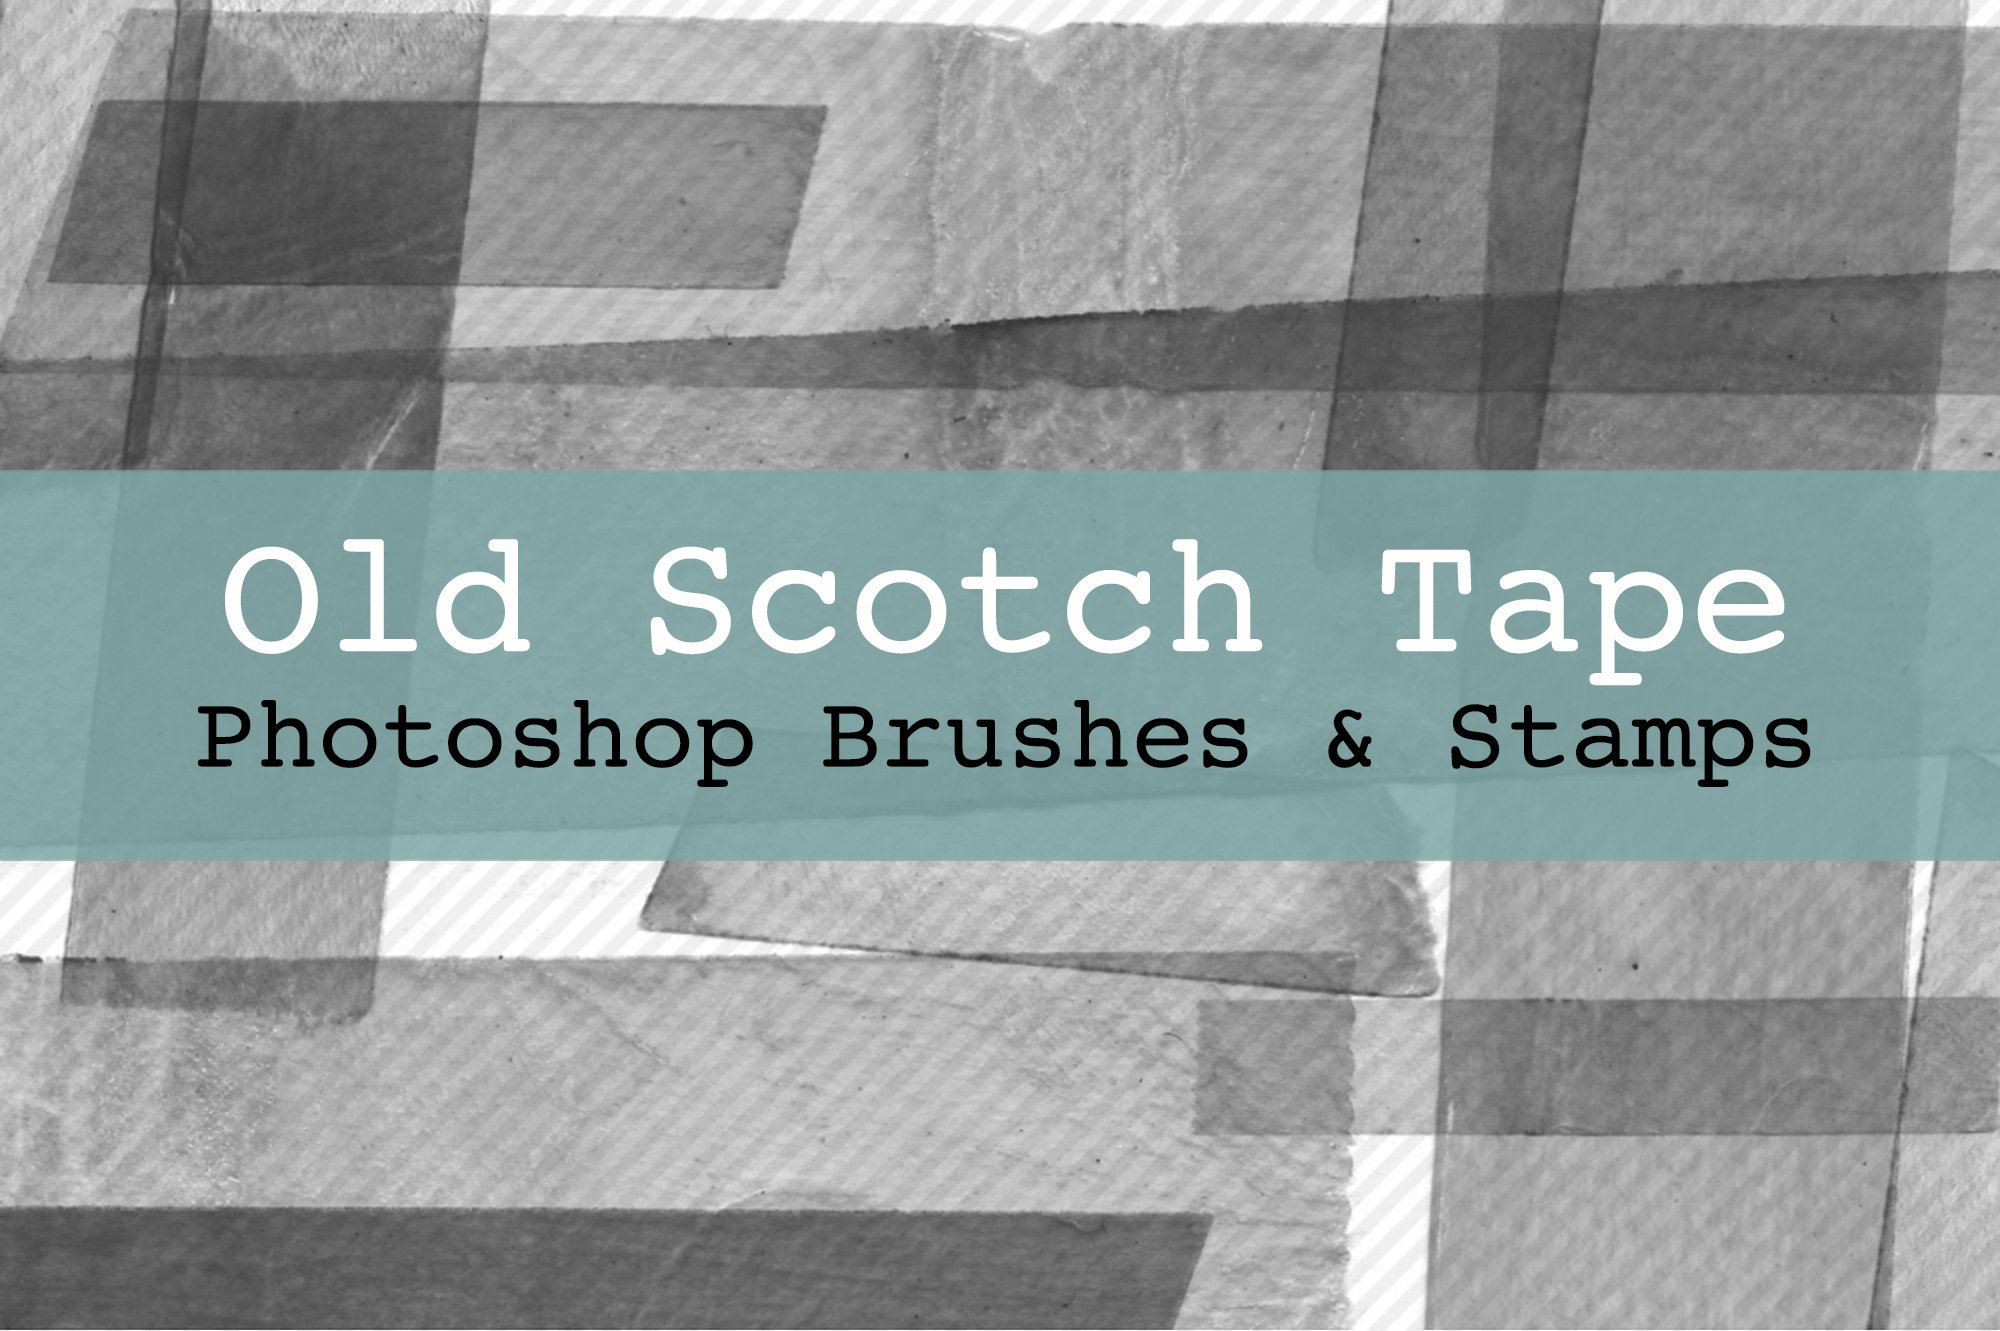 Old Scotch Tape PS Brushes & Stampscover image.